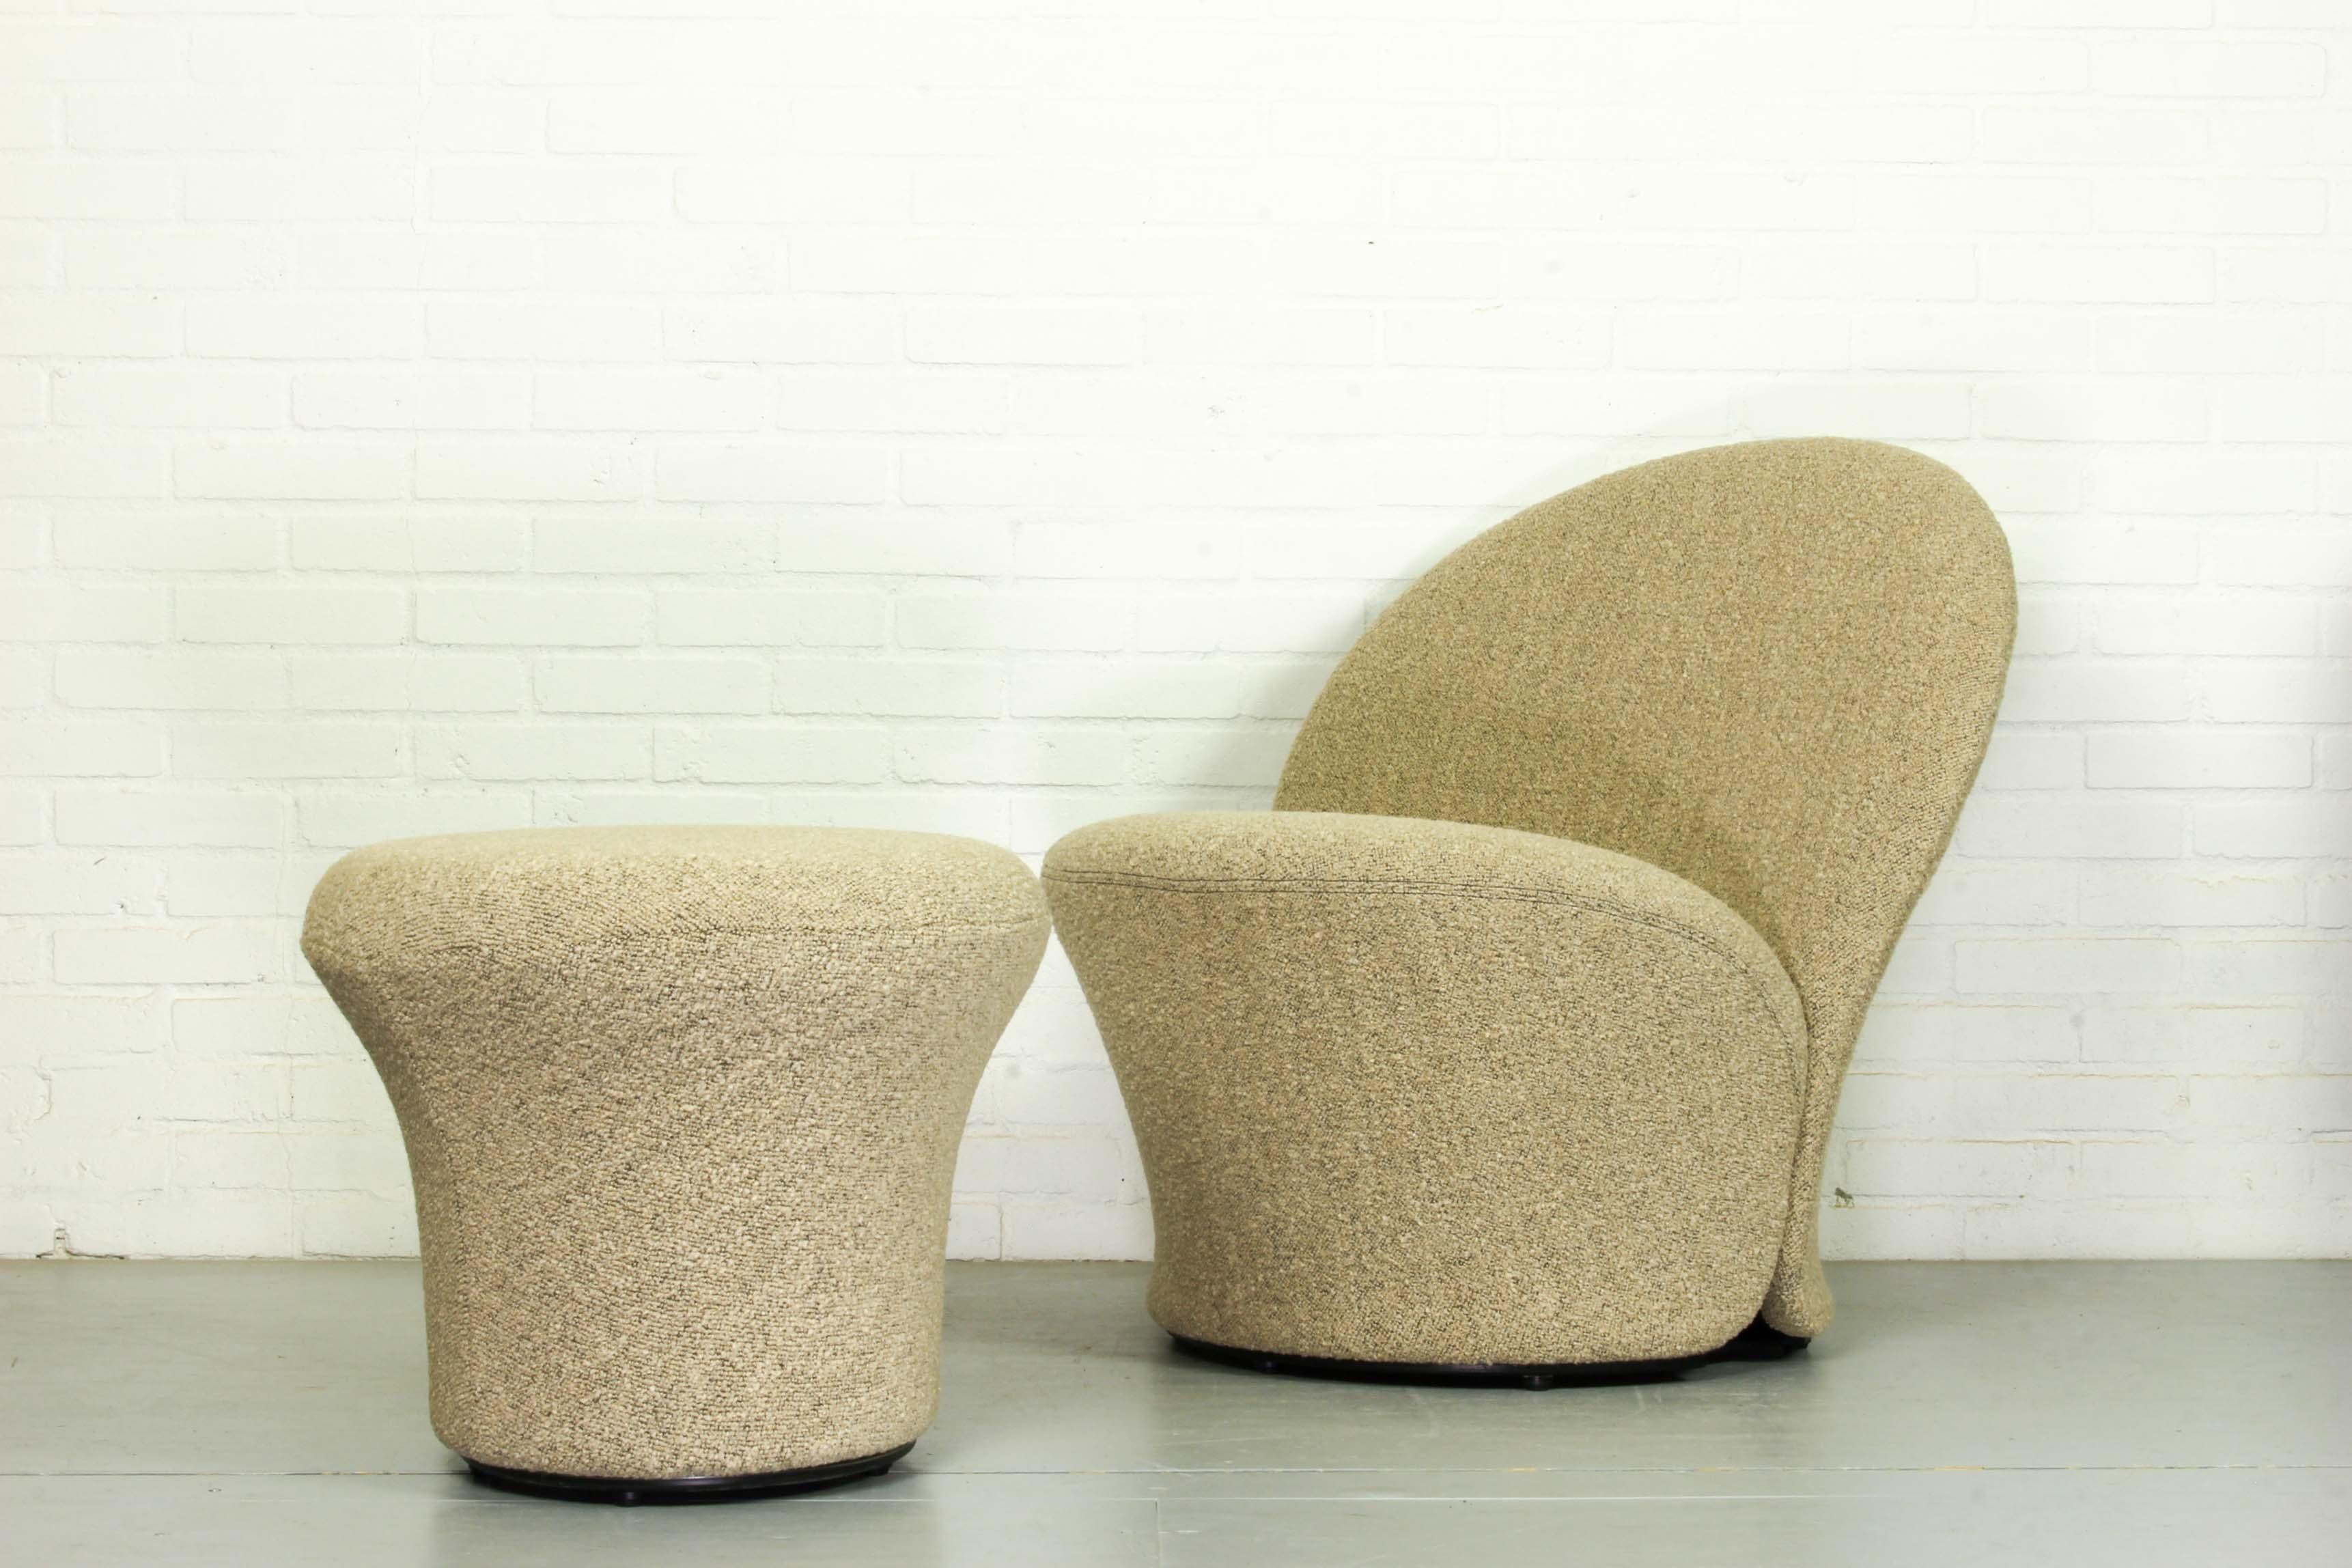 This set of sculpted chair and ottoman was designed by Pierre Paulin in 1967 and produced in the Netherlands by Artifort. This rare chair was only produced for one year from 1967-1968. It is made of steel and wood and features new nubby bouclé